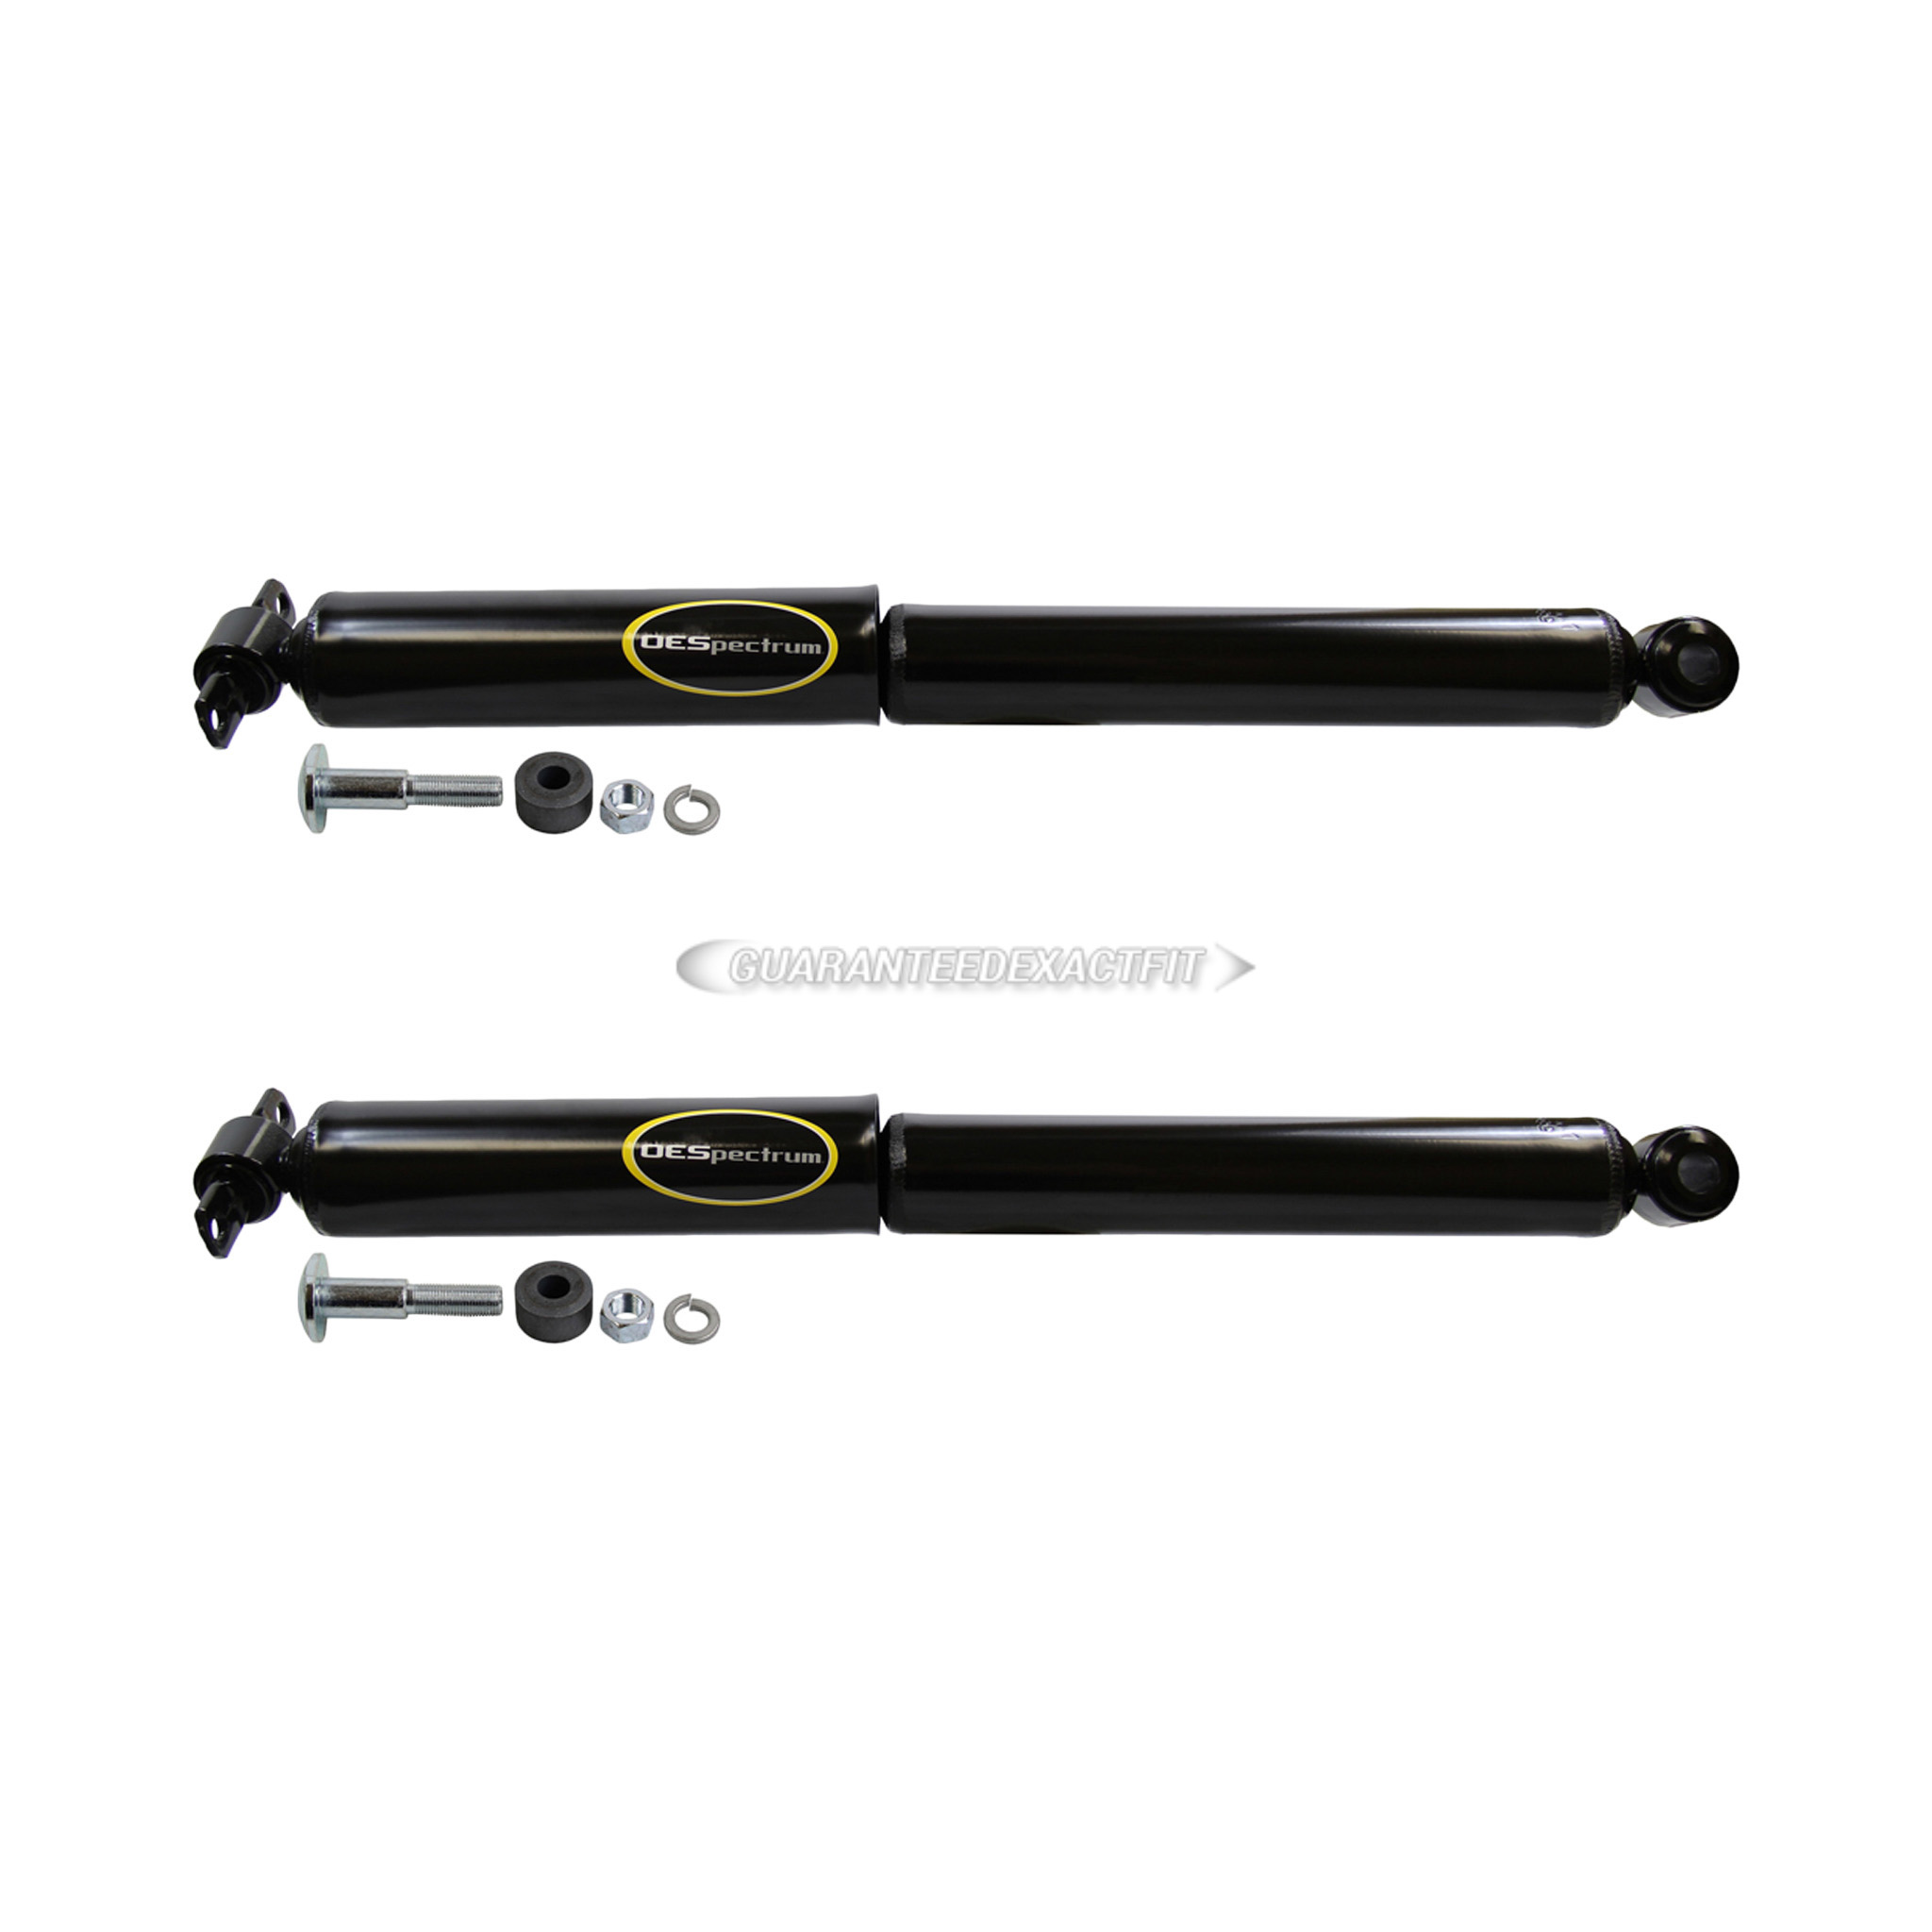 Set of 2 Rear Monroe Suspen Shock Absorbers for Buick Chevy w/o Electronic Susp